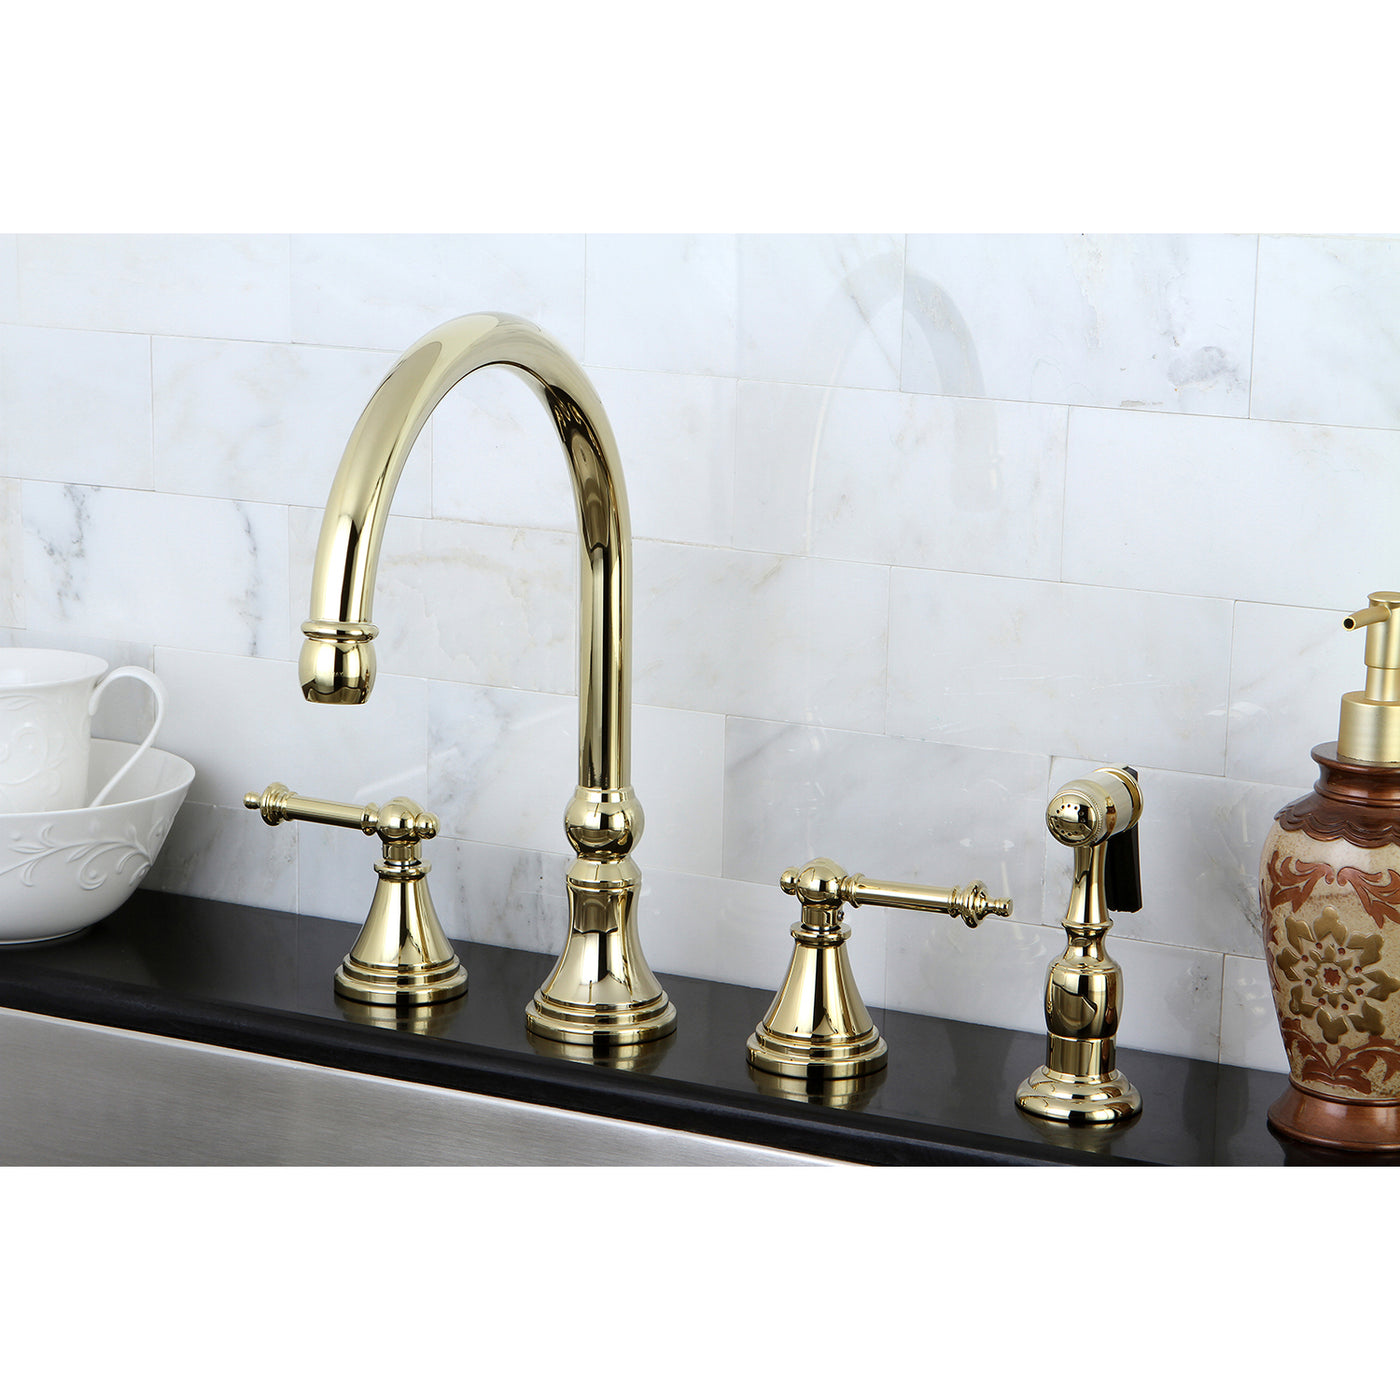 Elements of Design ES2792TLBS Widespread Kitchen Faucet with Brass Sprayer, Polished Brass